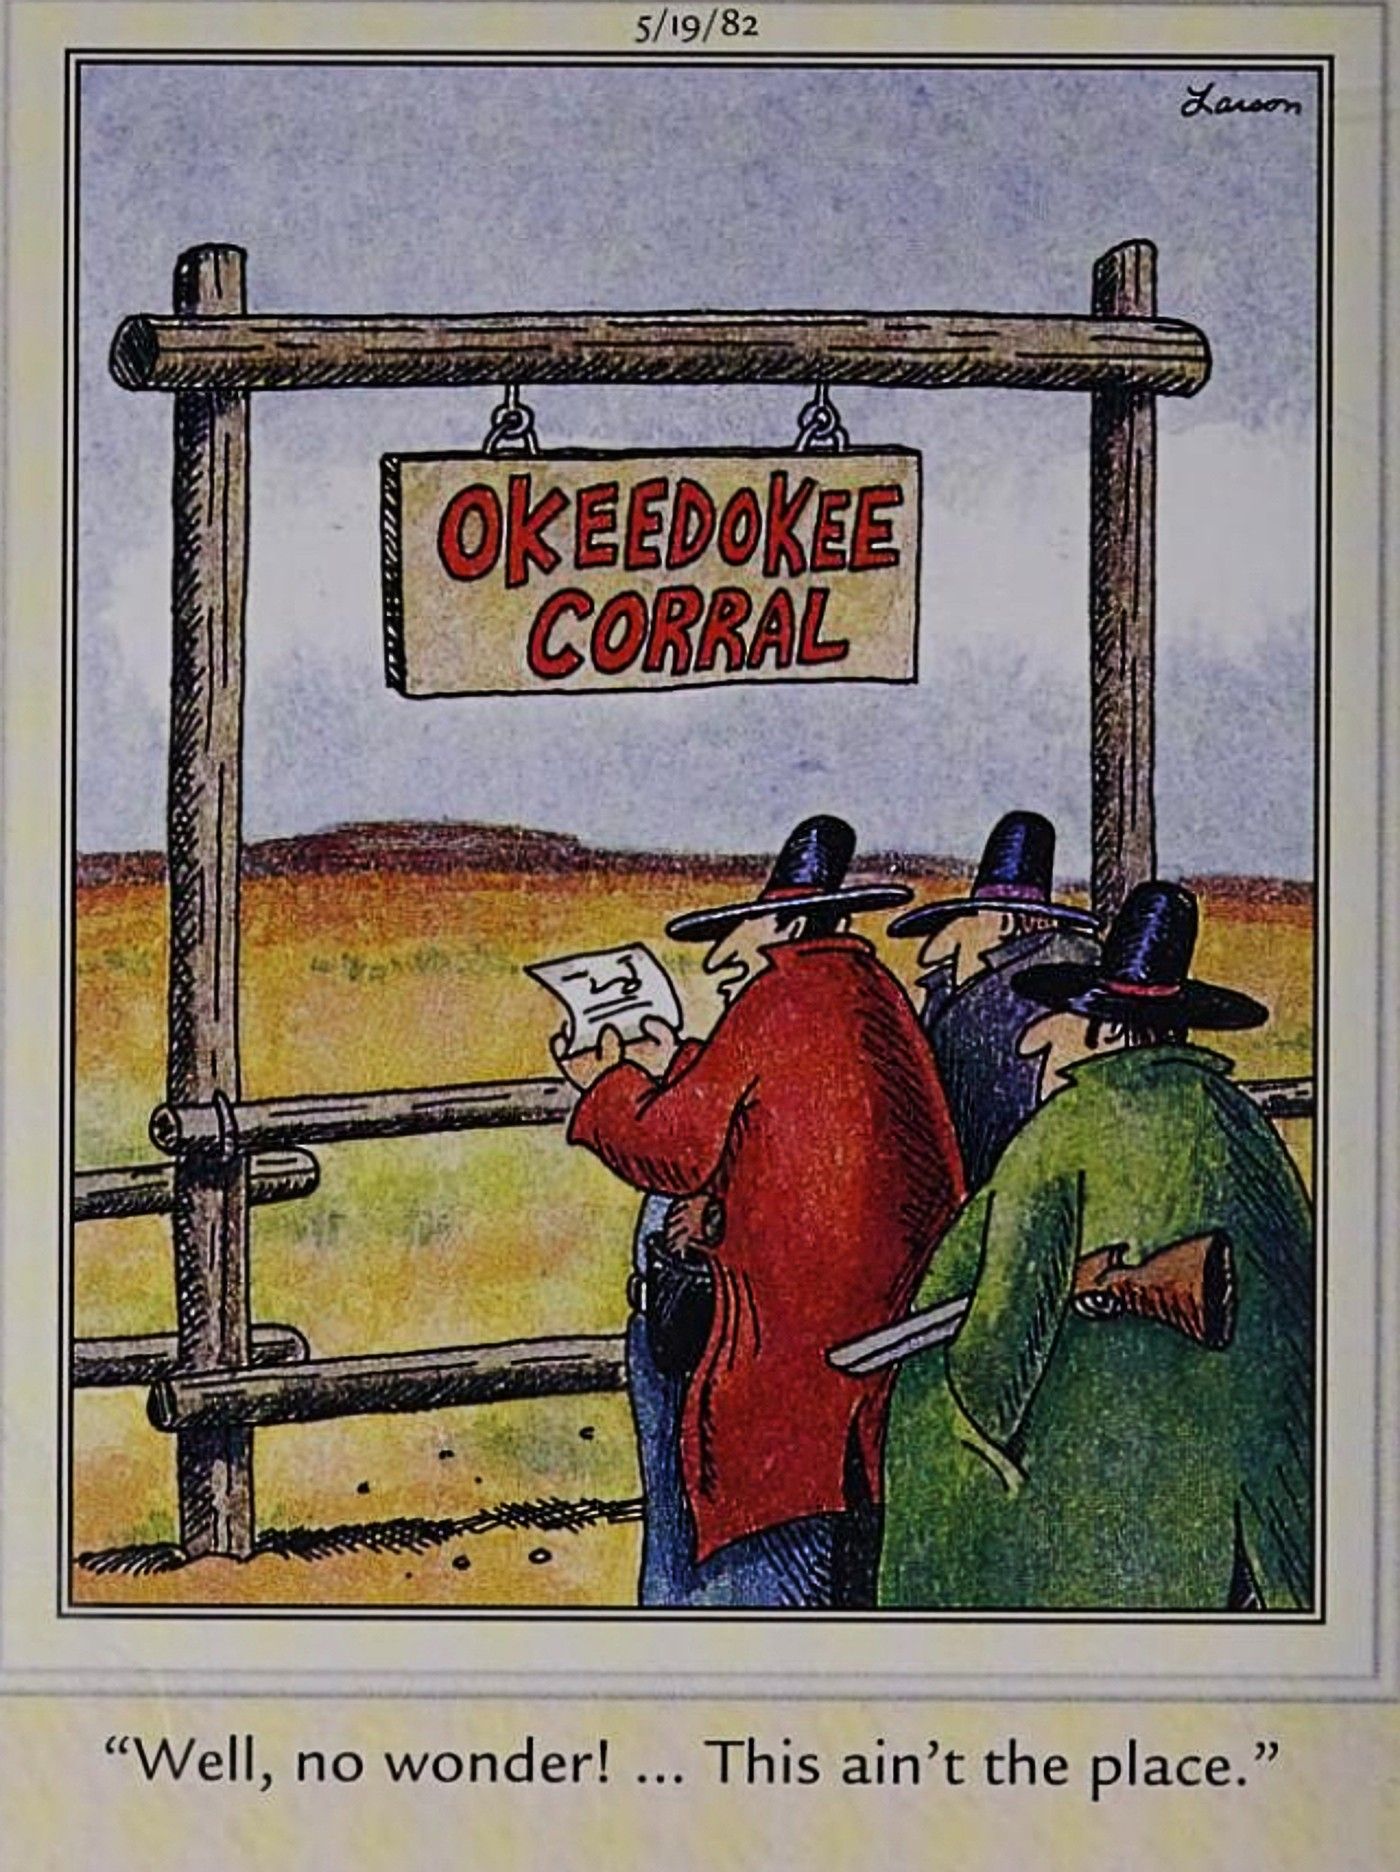 Far Side, gunfighters mistakenly arrive at the 